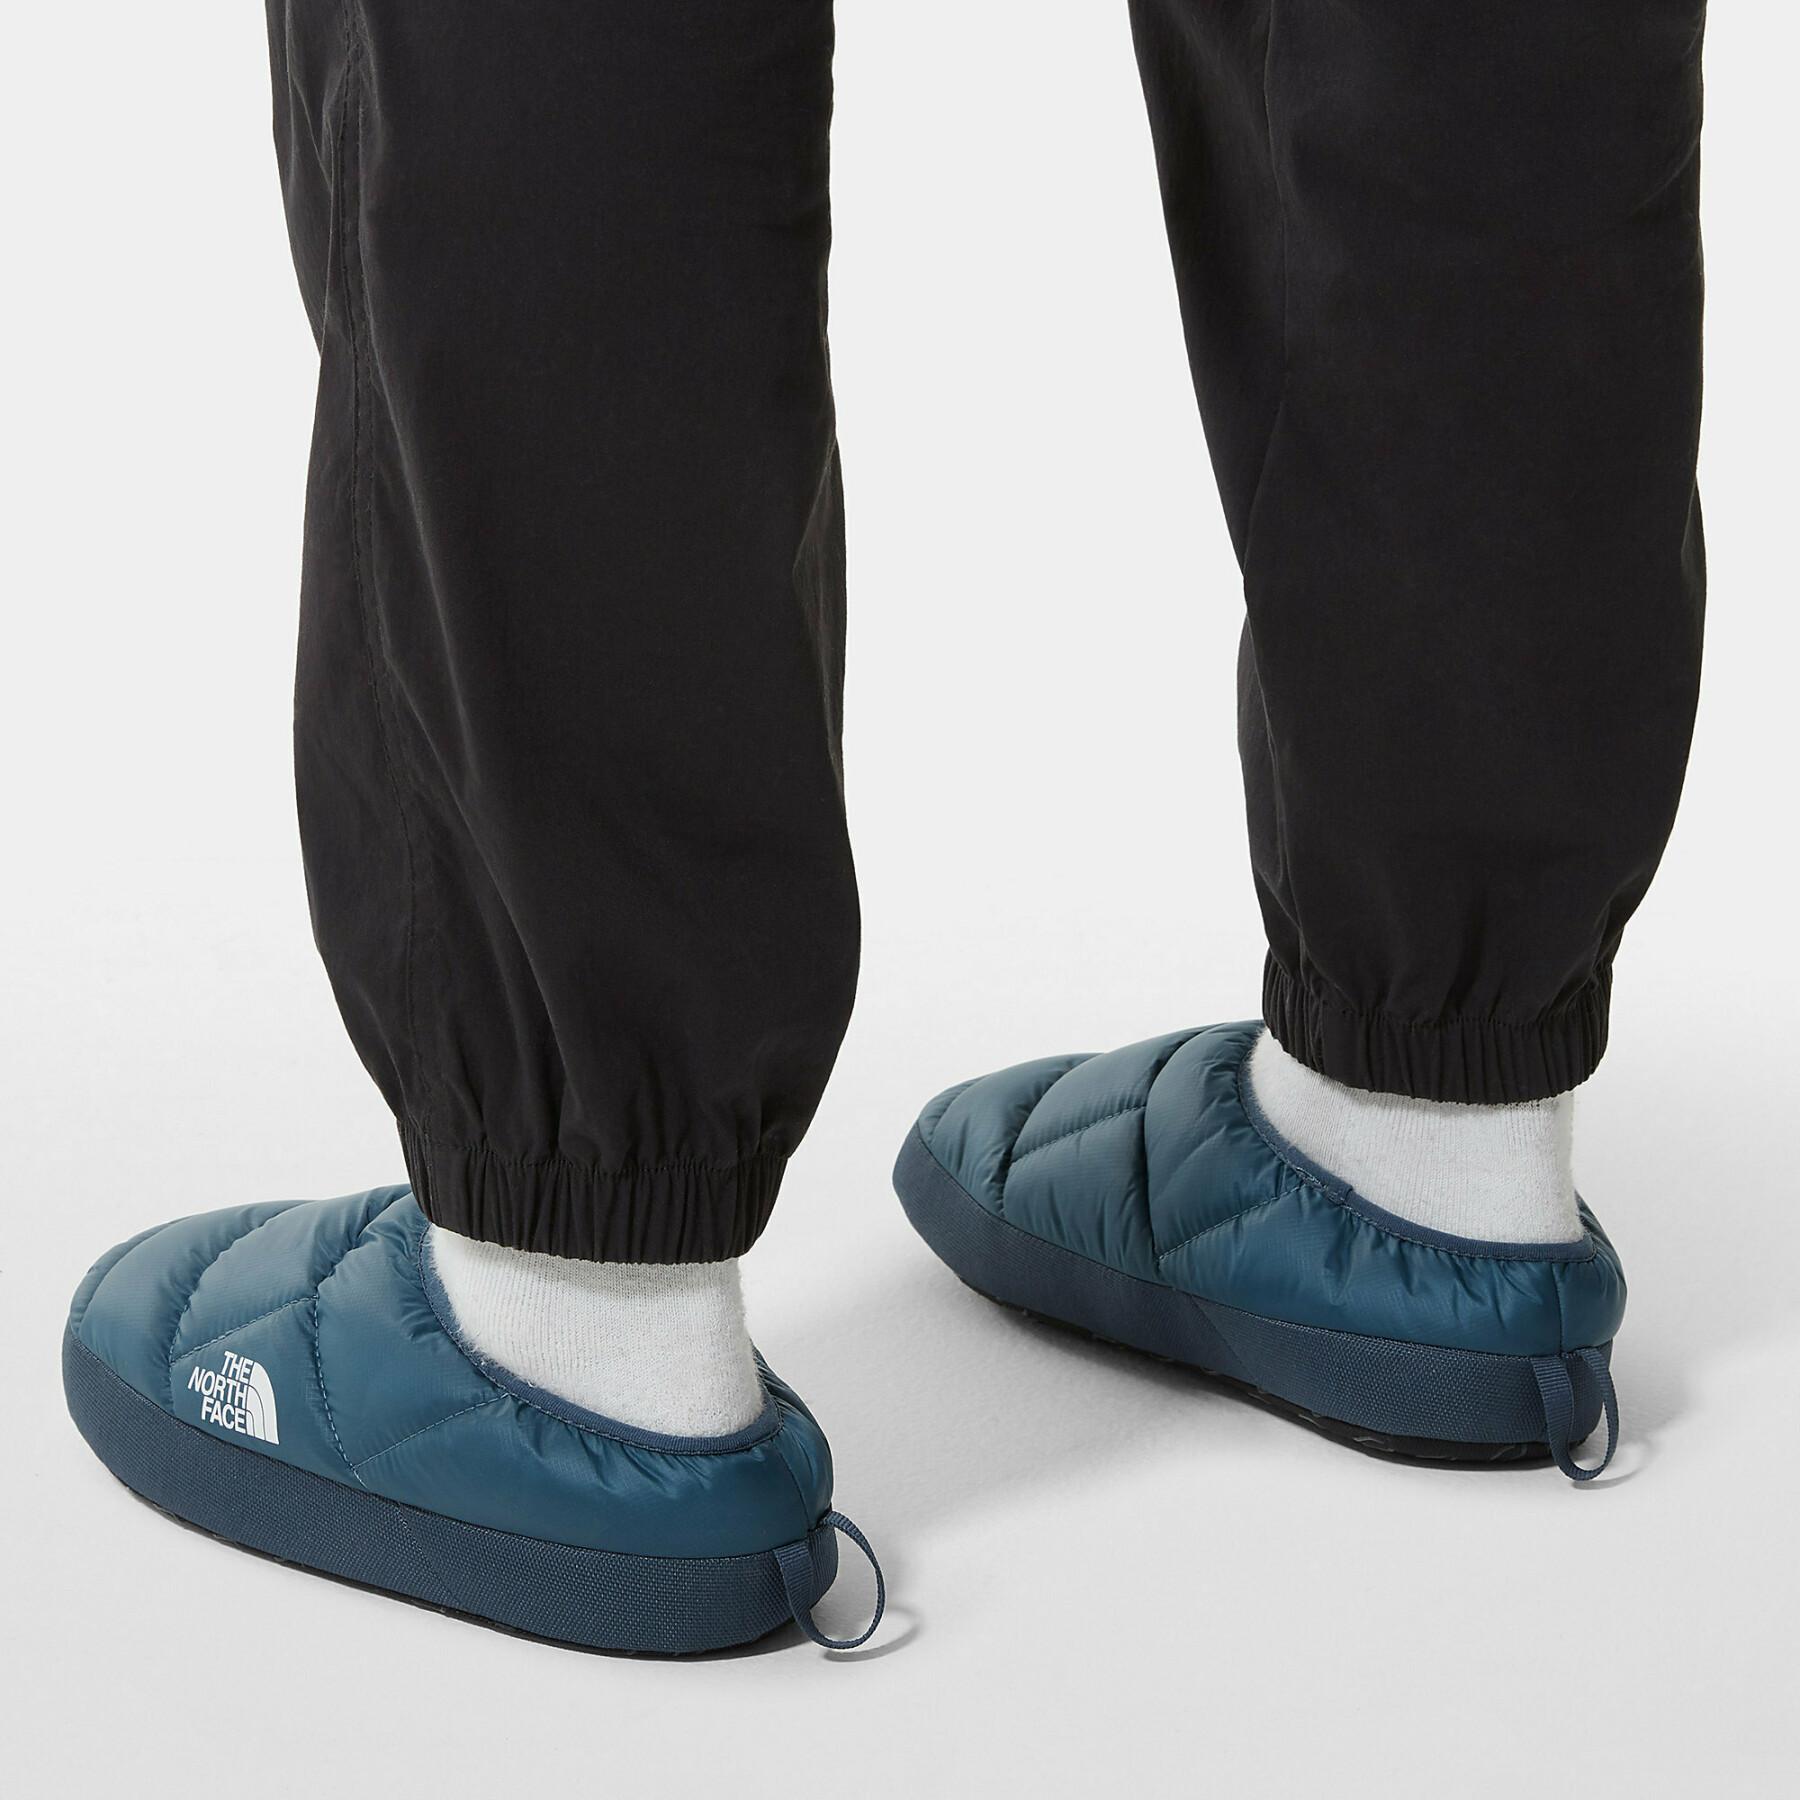 Chaussons The North Face Nse Tent III